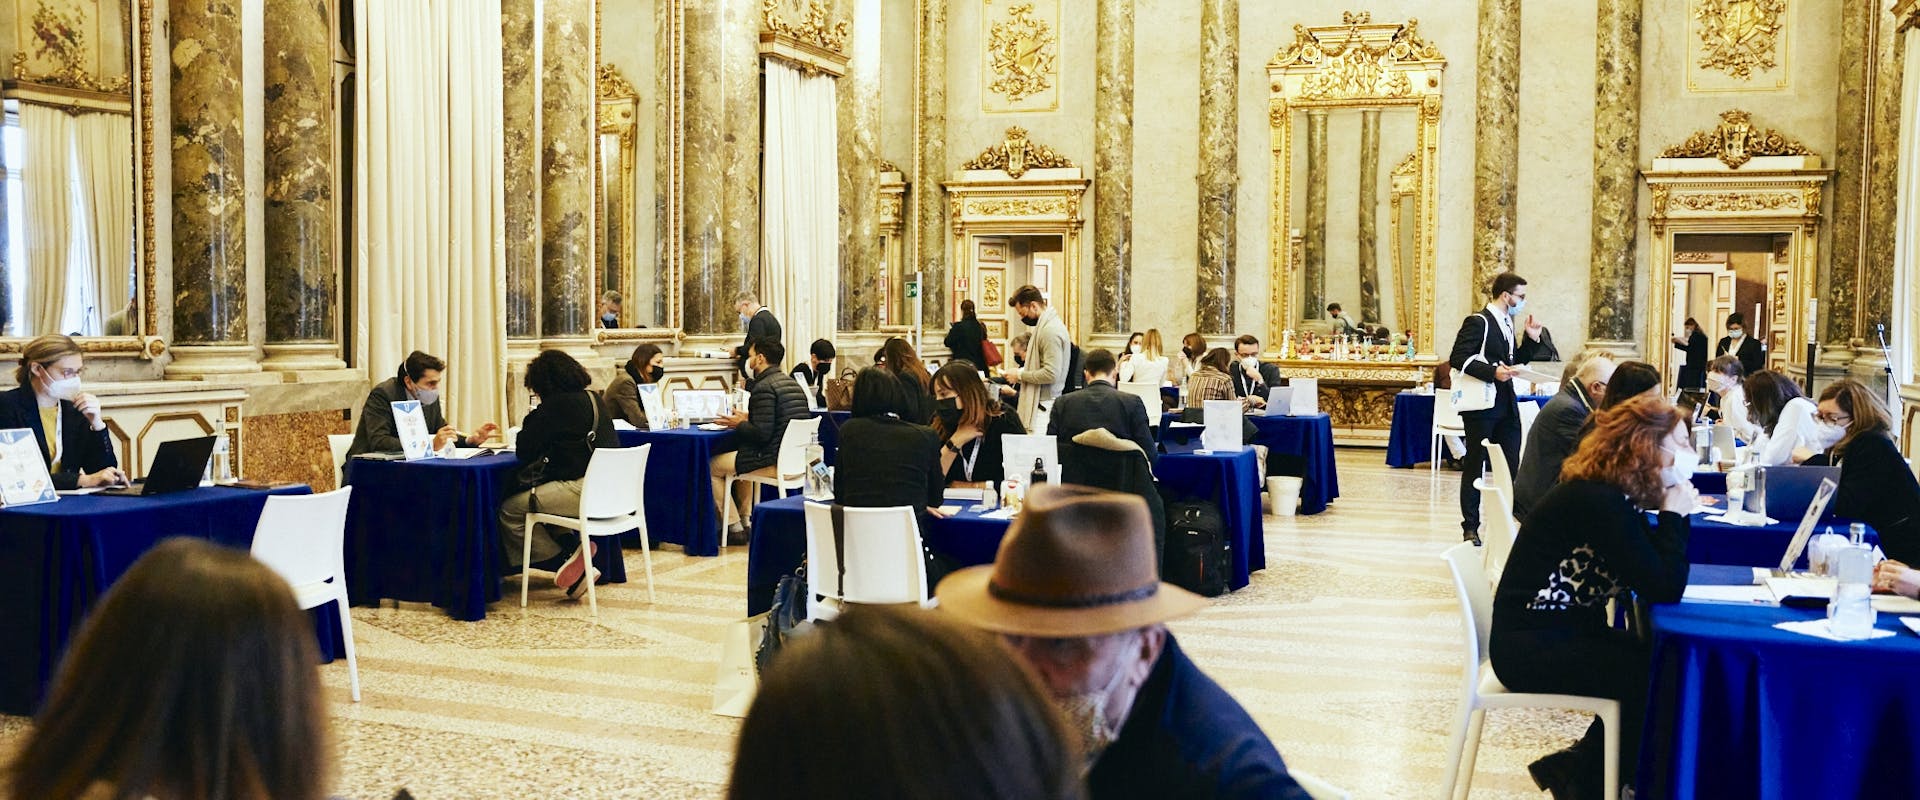 meeting-room-historical-palace-b2b-events